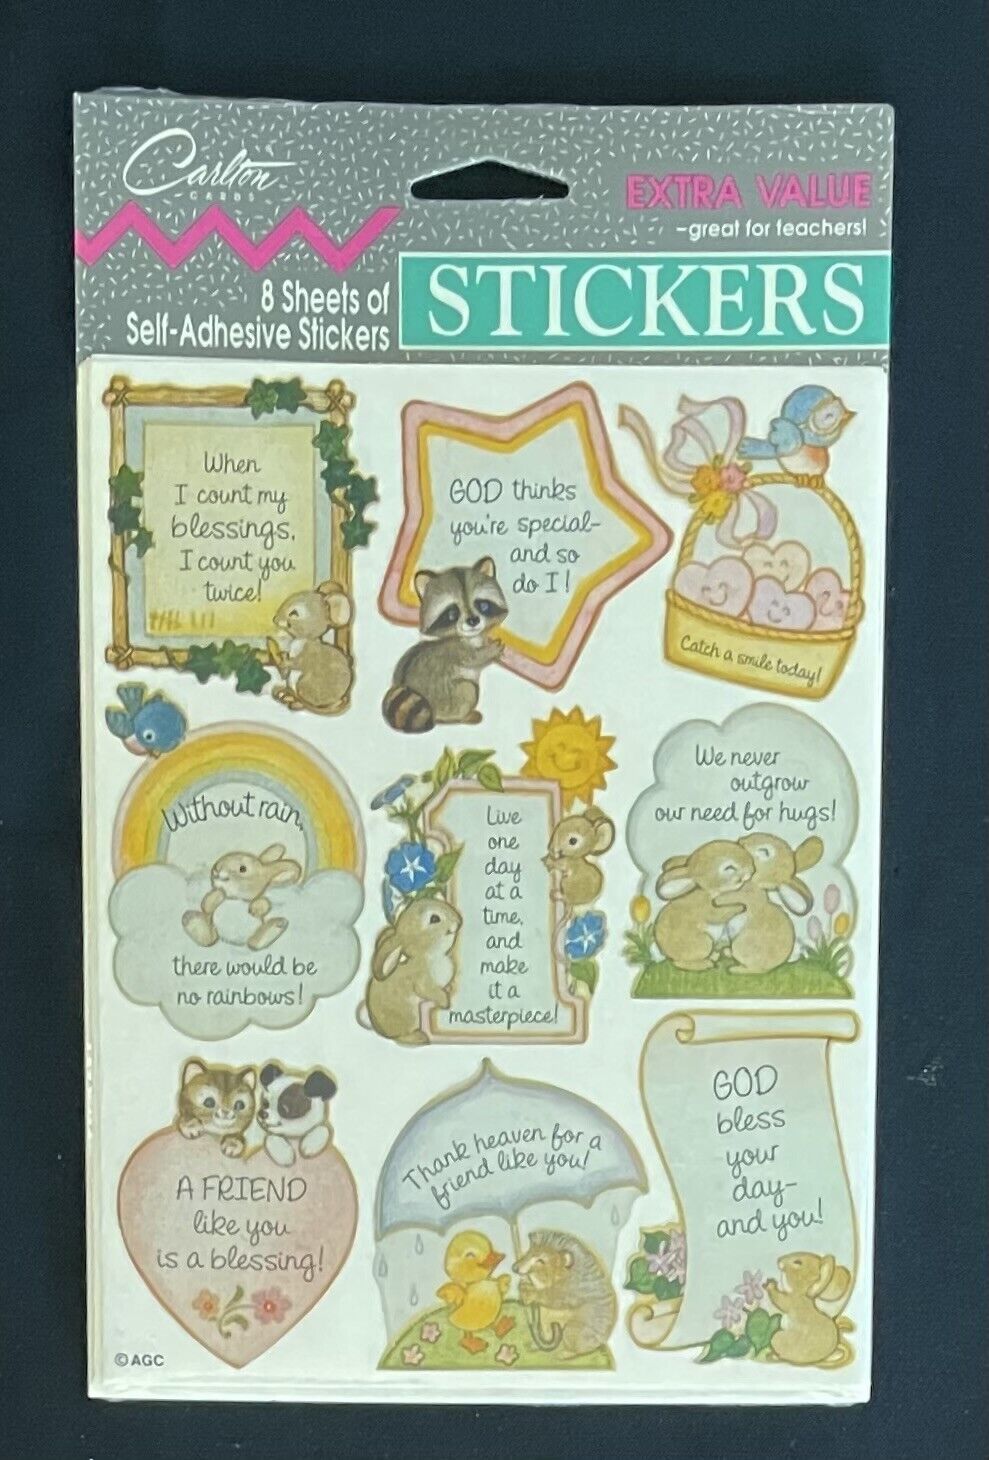 Vintage Carlton Cards/AGC, Inc. Religion Themed Stickers 8 Sheets FACTORY SEALED